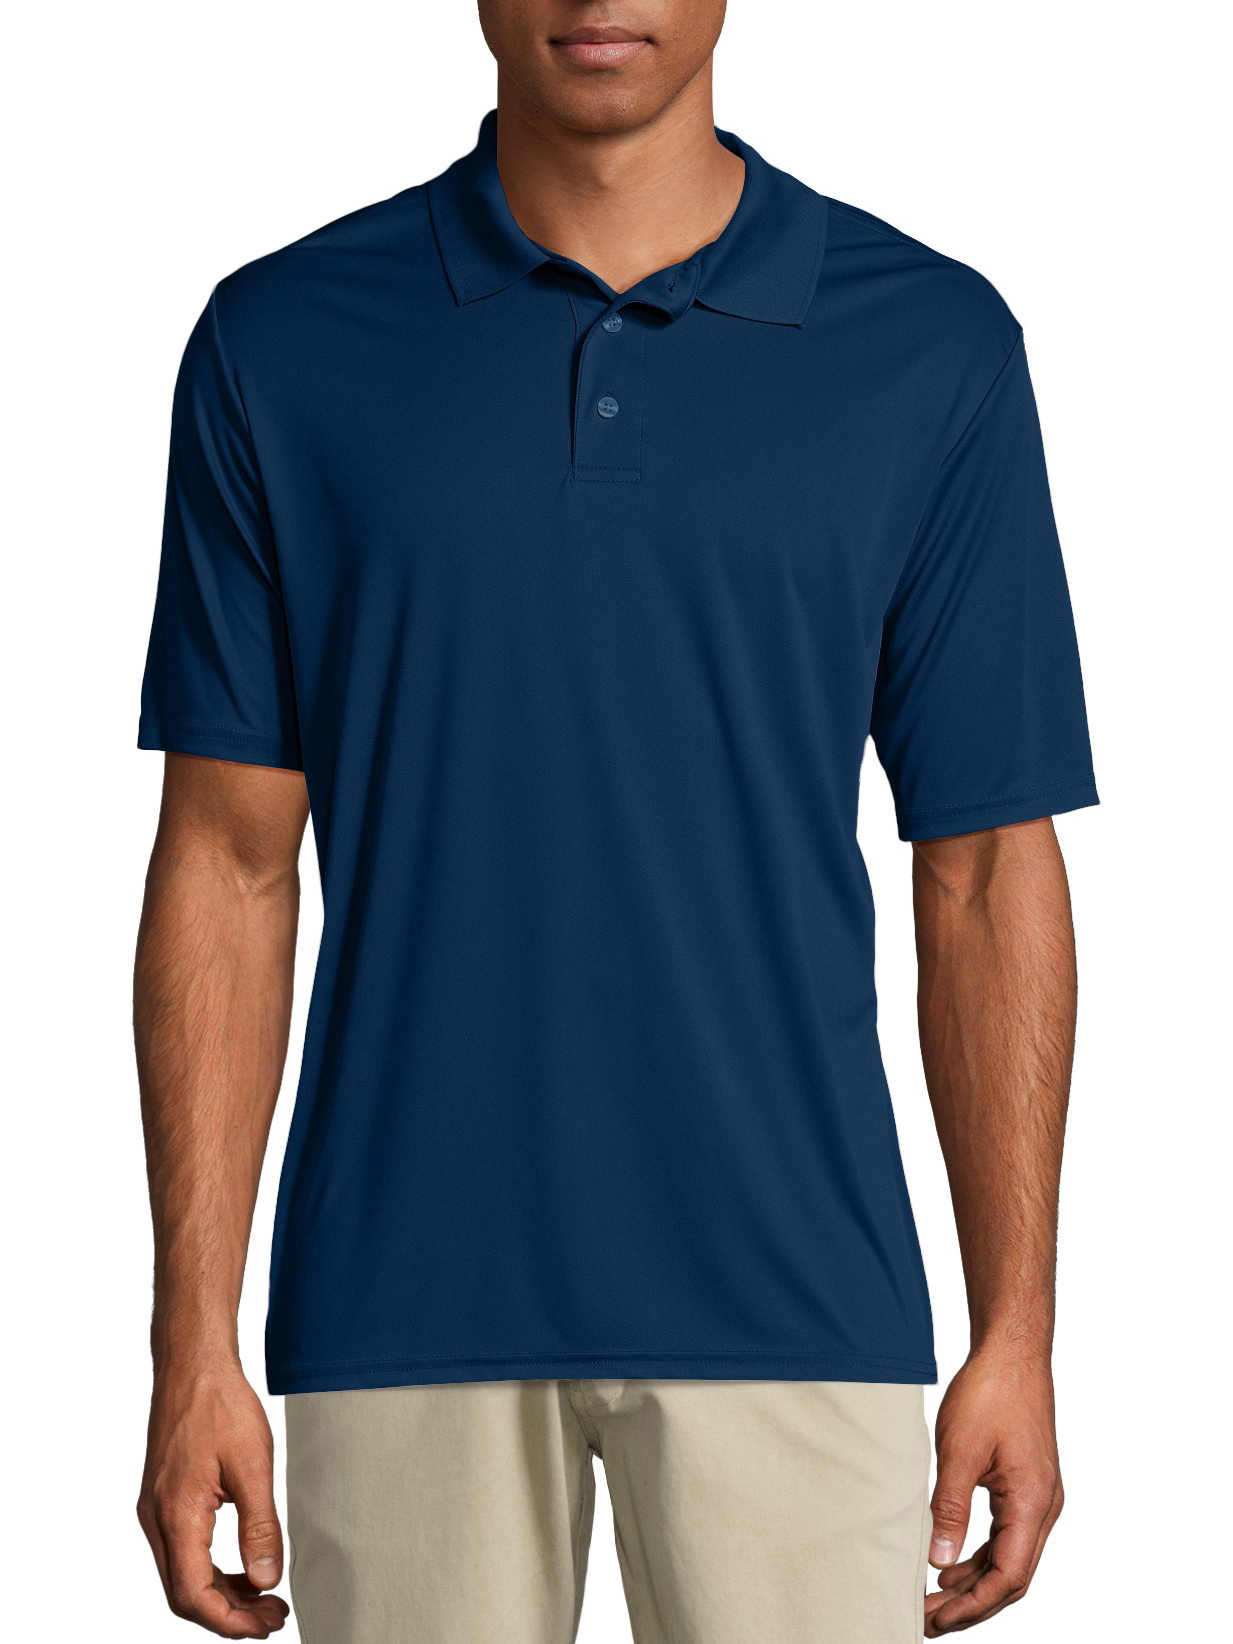 Hanes Sport Men's and Big Men's Cool Dri Performance Polo (40+ UPF), Up to Size 3XL - image 1 of 6